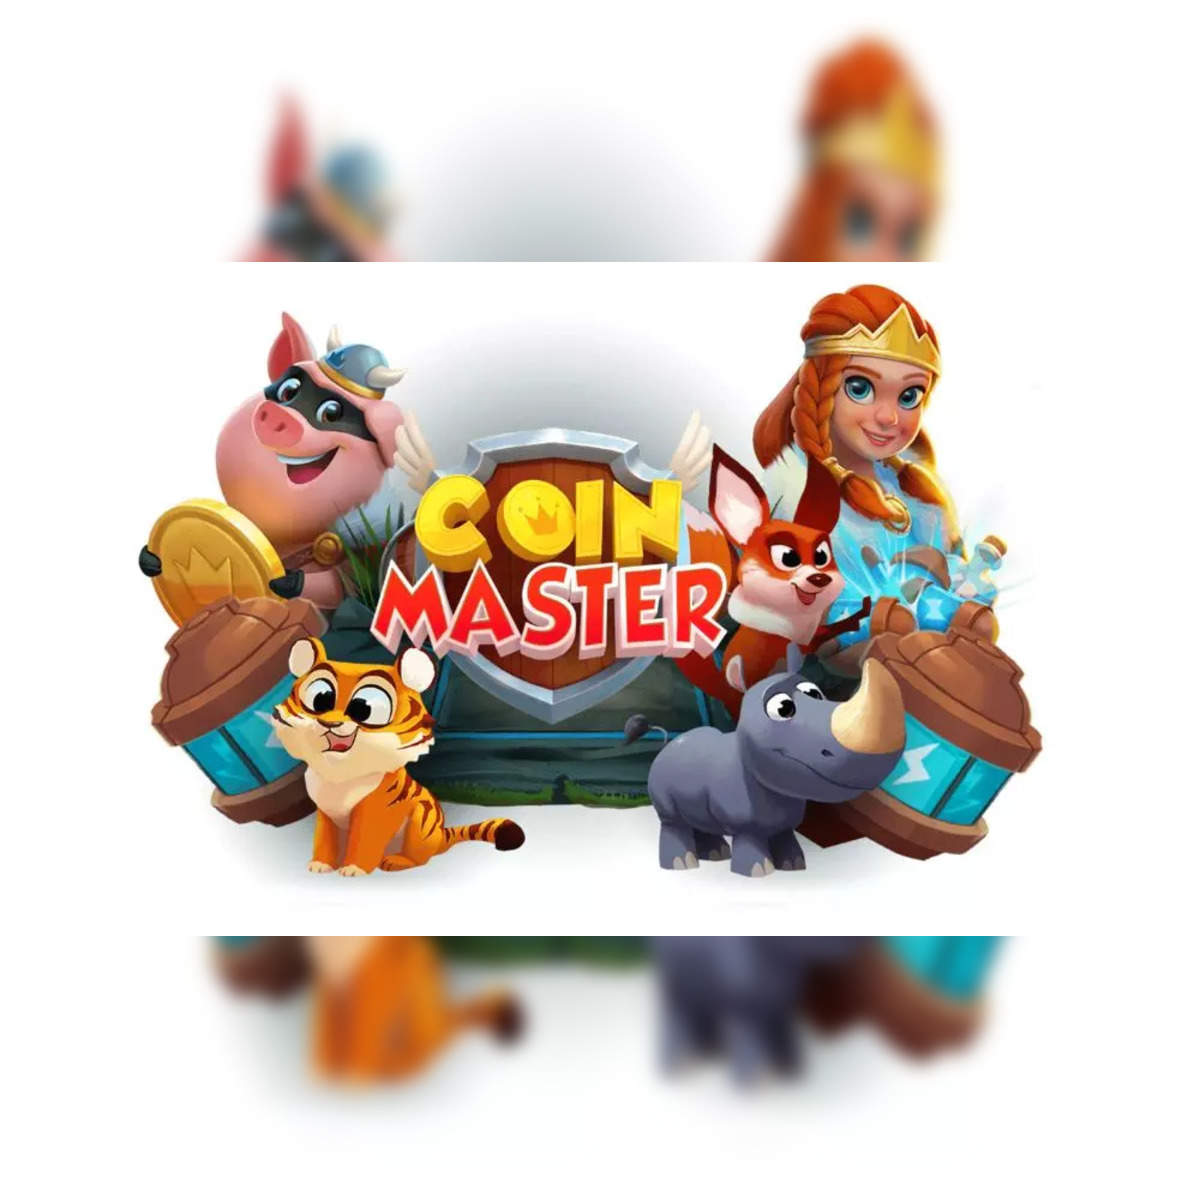 Coin Master Free Spins & Coins Links Group